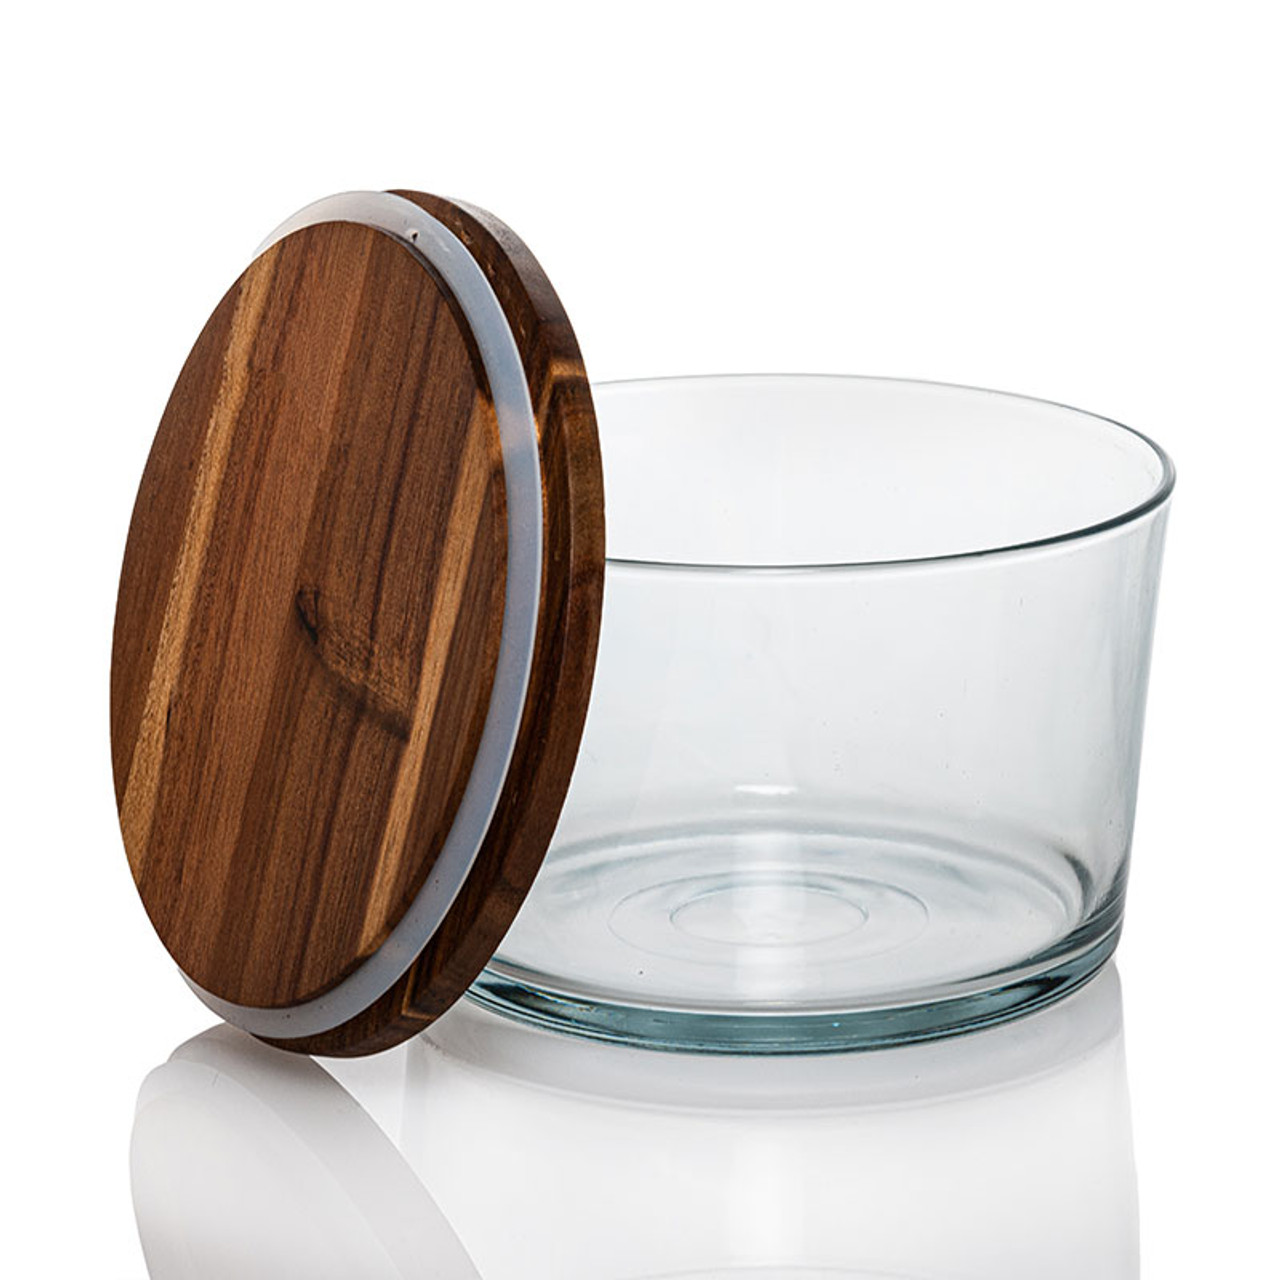 Anchor Hocking Glass Trifle Bowl with Lid, 104 oz, Acacia Wood Lid